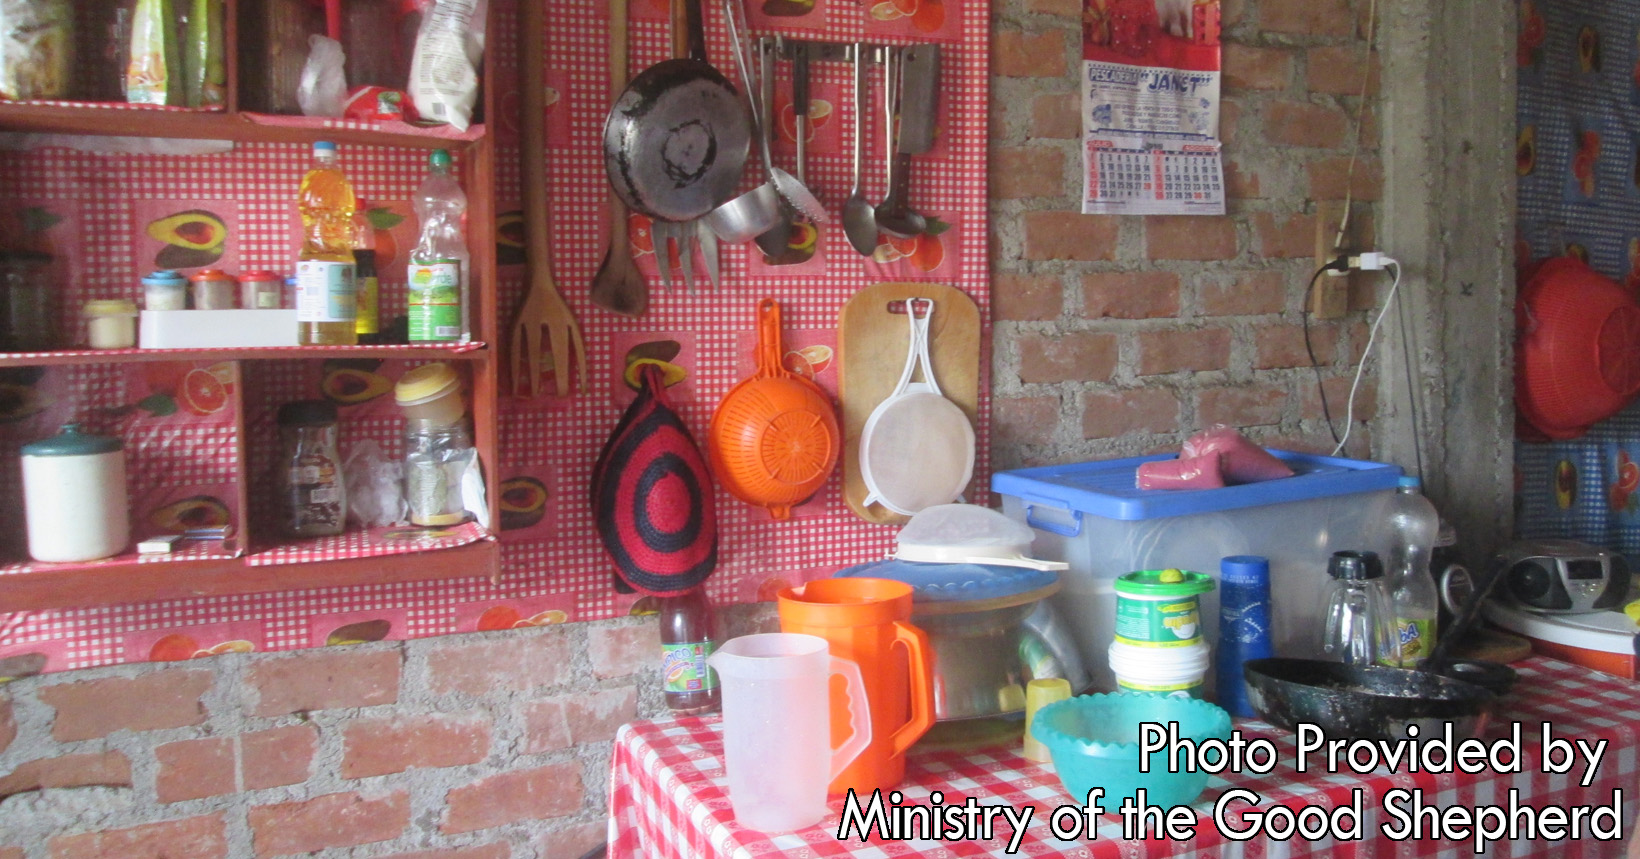 The Ministry of the Good Shepard keeps all their utensils for cooking and cleaning organized. All pans and pots are hanging in their correct spot and the shelves are neatly put together.